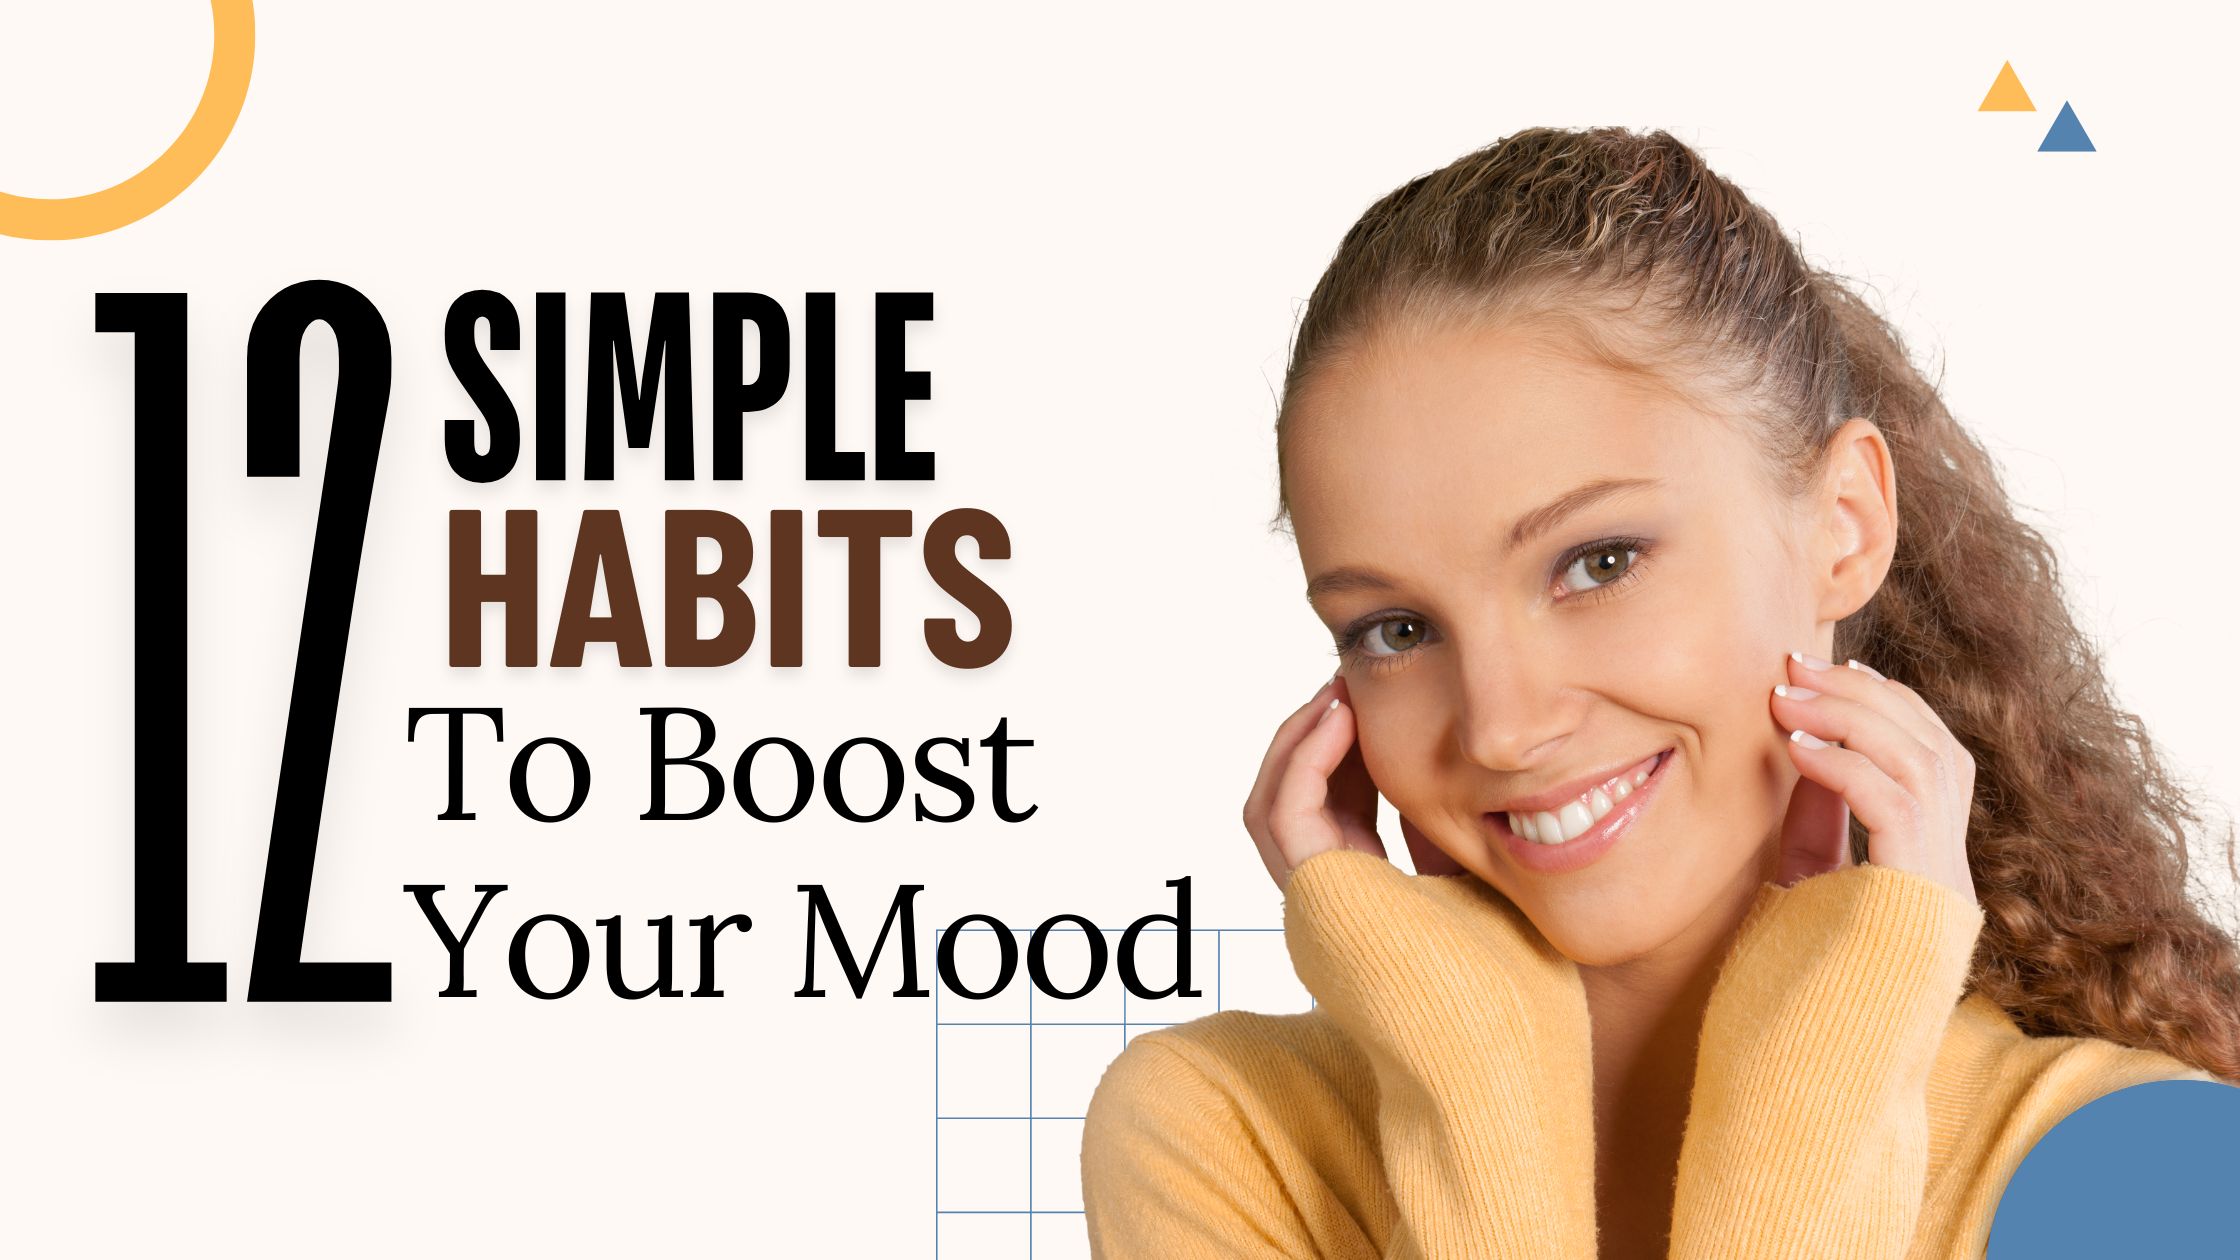 12 Simple Habits to Boost Your Mood - mood improvement habits